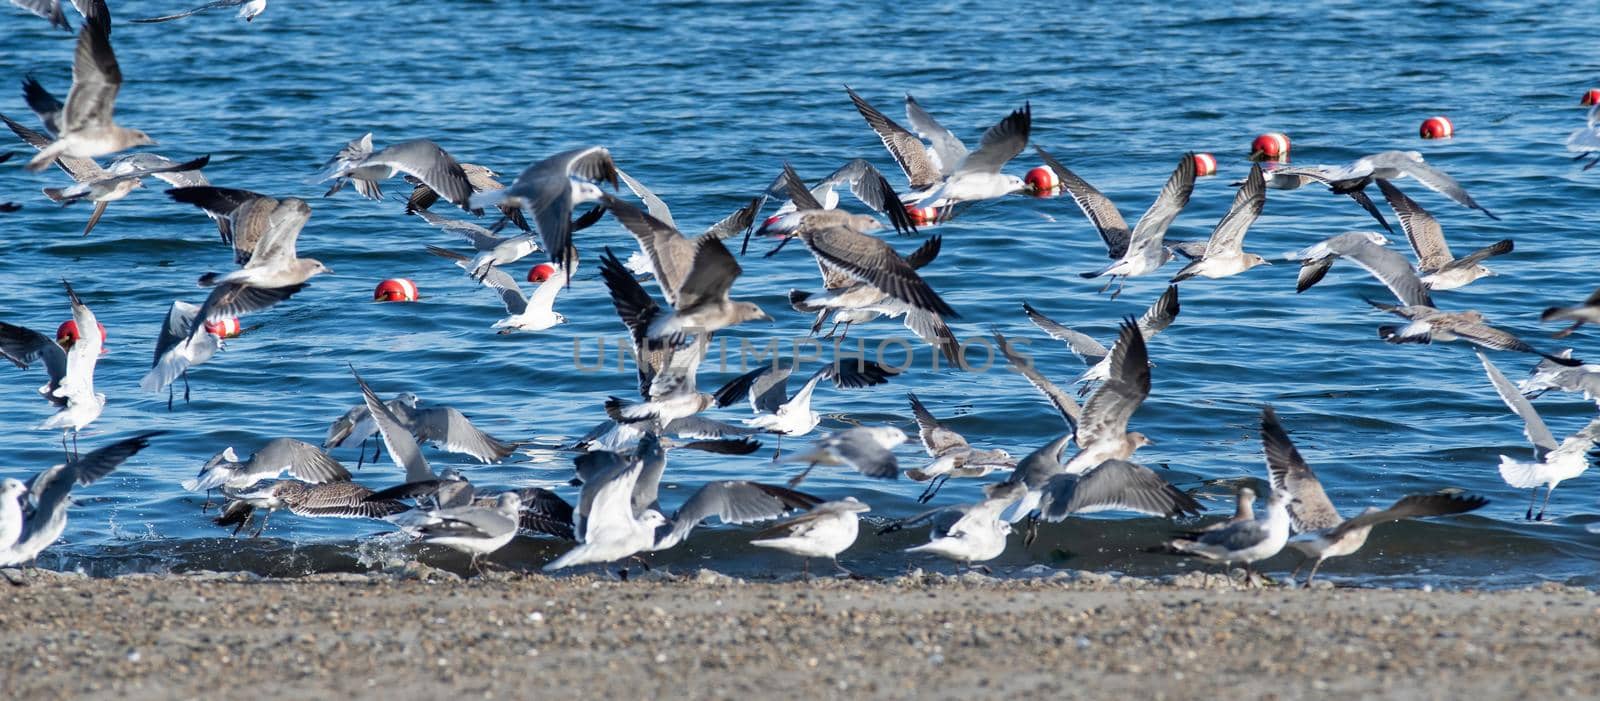 large flock of seagulls on the beach in rhode island by digidreamgrafix